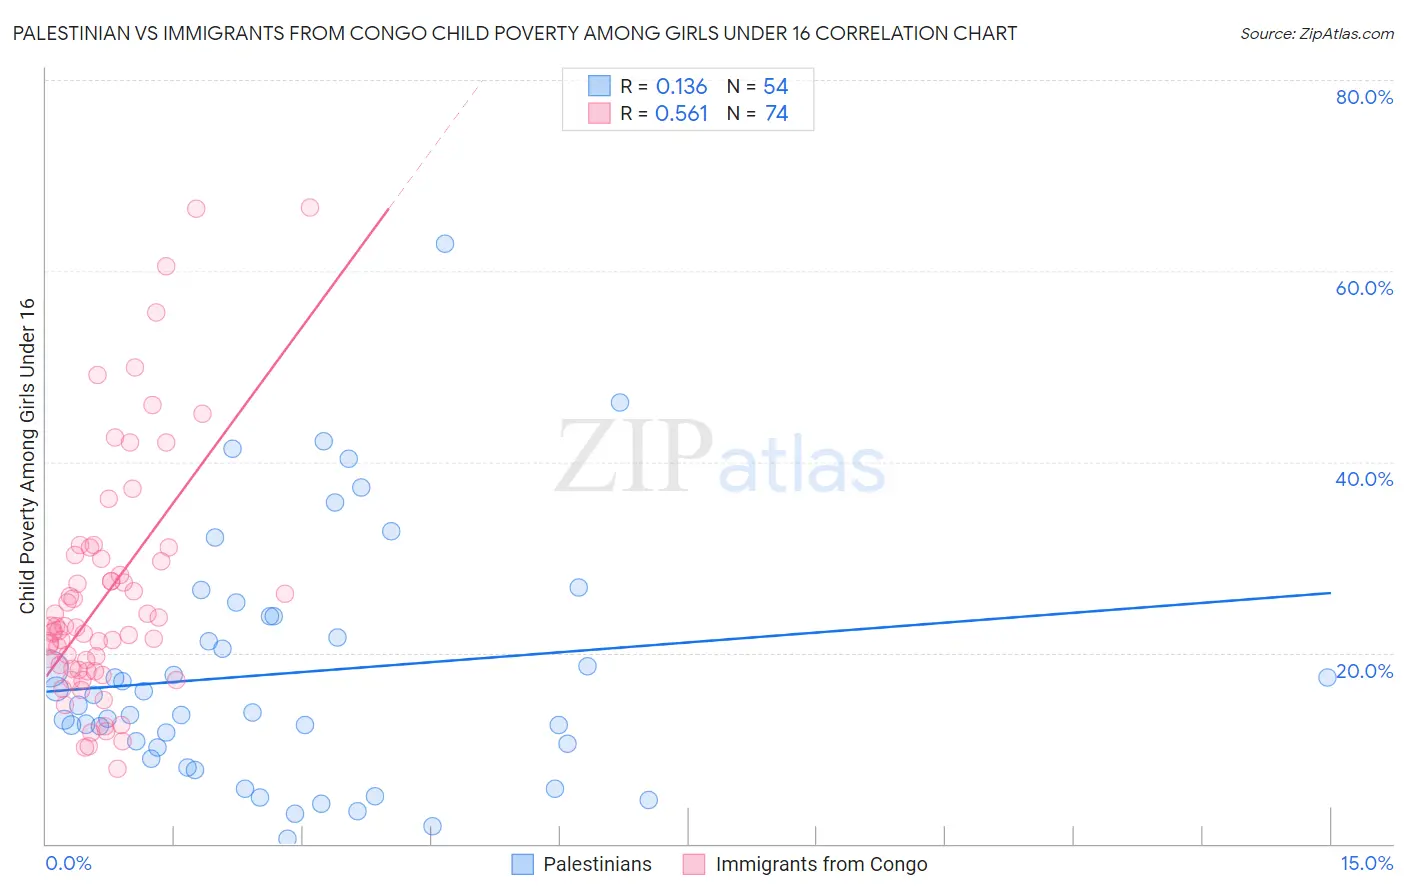 Palestinian vs Immigrants from Congo Child Poverty Among Girls Under 16